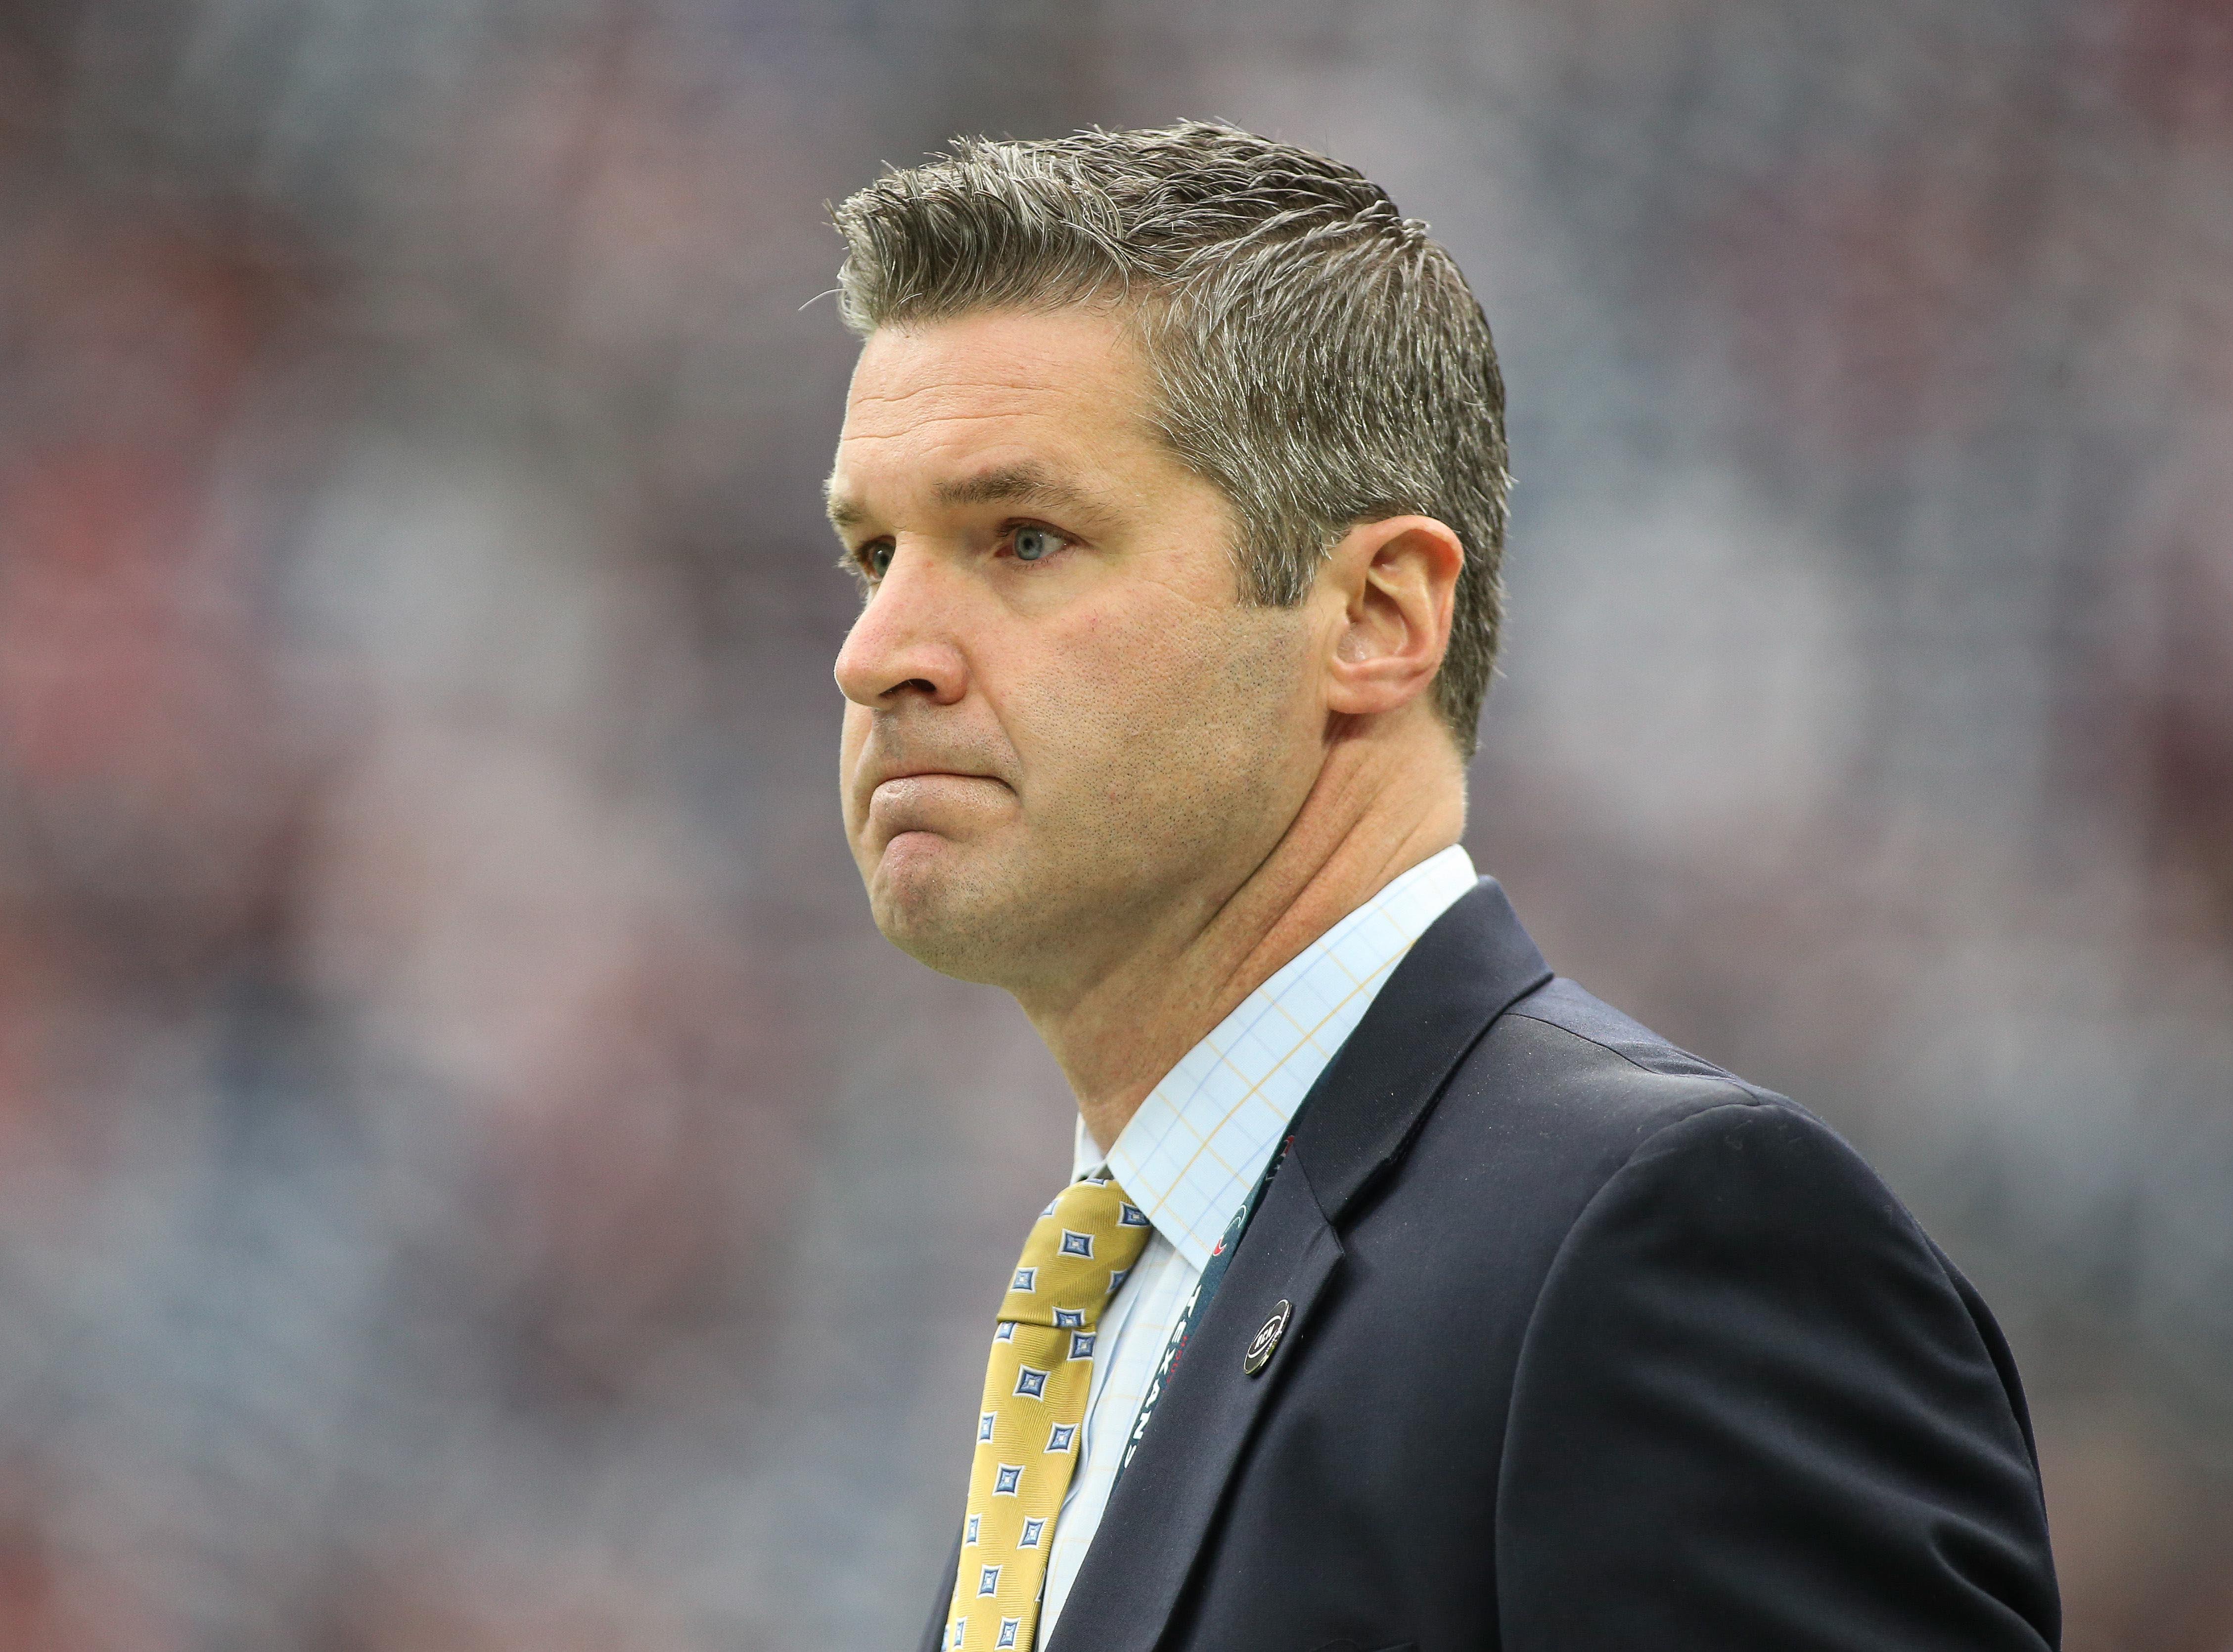 Houston Texans fire general manager Brian Gaine in surprise move